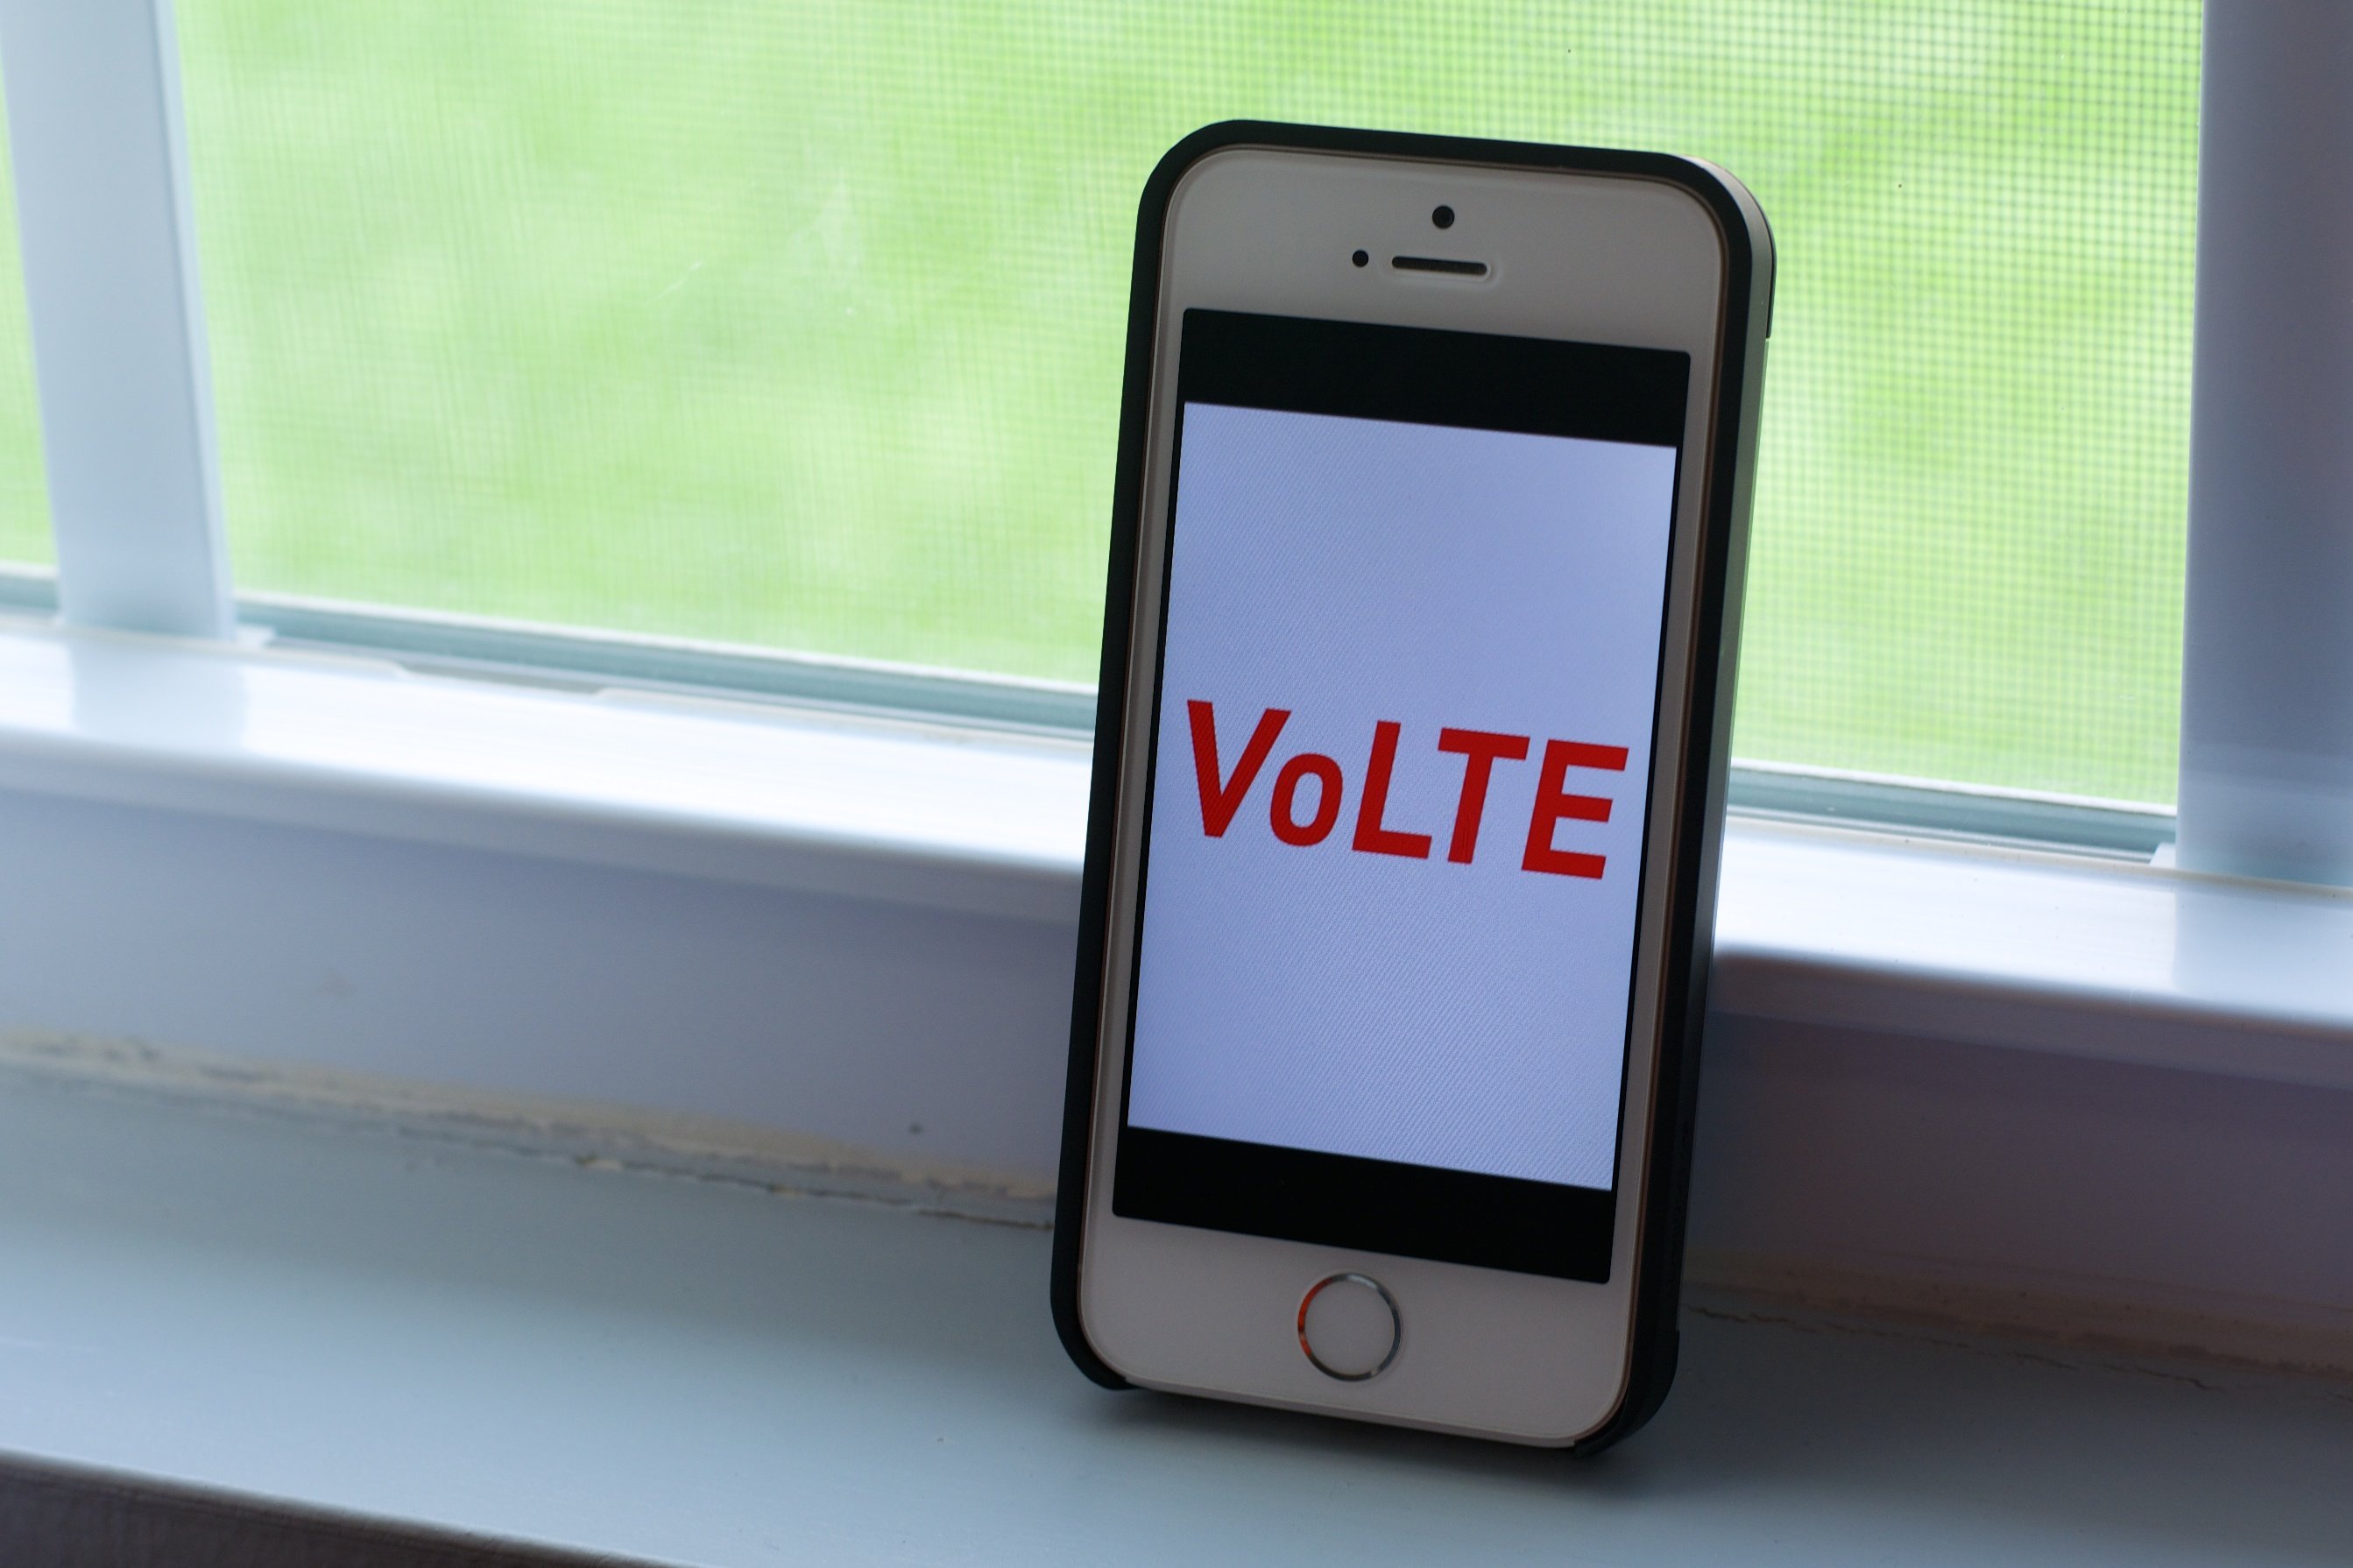 Verizon VoLTE is coming in 2014 and may come to the iPhone 5s with an iOS 8 update later this year.